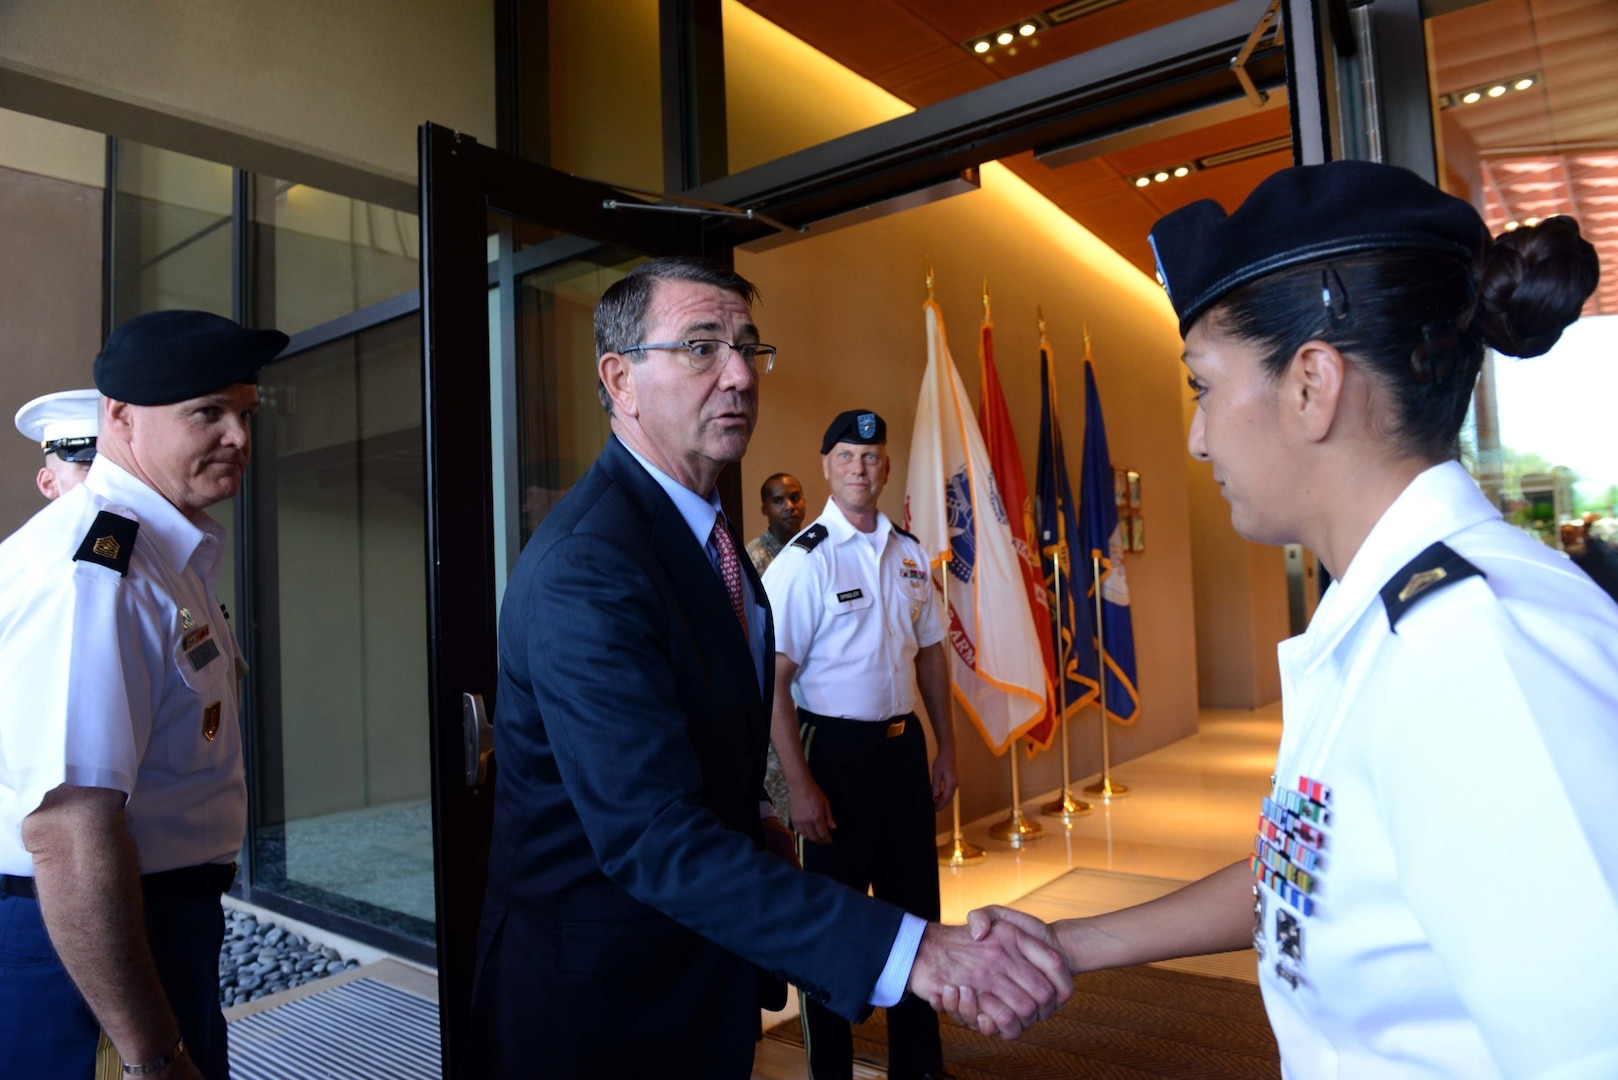 Secretary of Defense Ash Carter greets U.S. Army Staff Sgt. Claudia Smallman, Defense POW/MIA Accounting Agency recovery noncommissioned officer.  While at DPAA, he spoke with service members about the importance of the agency's joint mission in the Indo-Asia Pacific region. The mission of the Defense POW/MIA Accounting Agency is to provide the fullest possible accounting for our missing personnel to their families and the nation. (U.S. Air Force photo by Staff Sgt. La'Shanette Garrett)